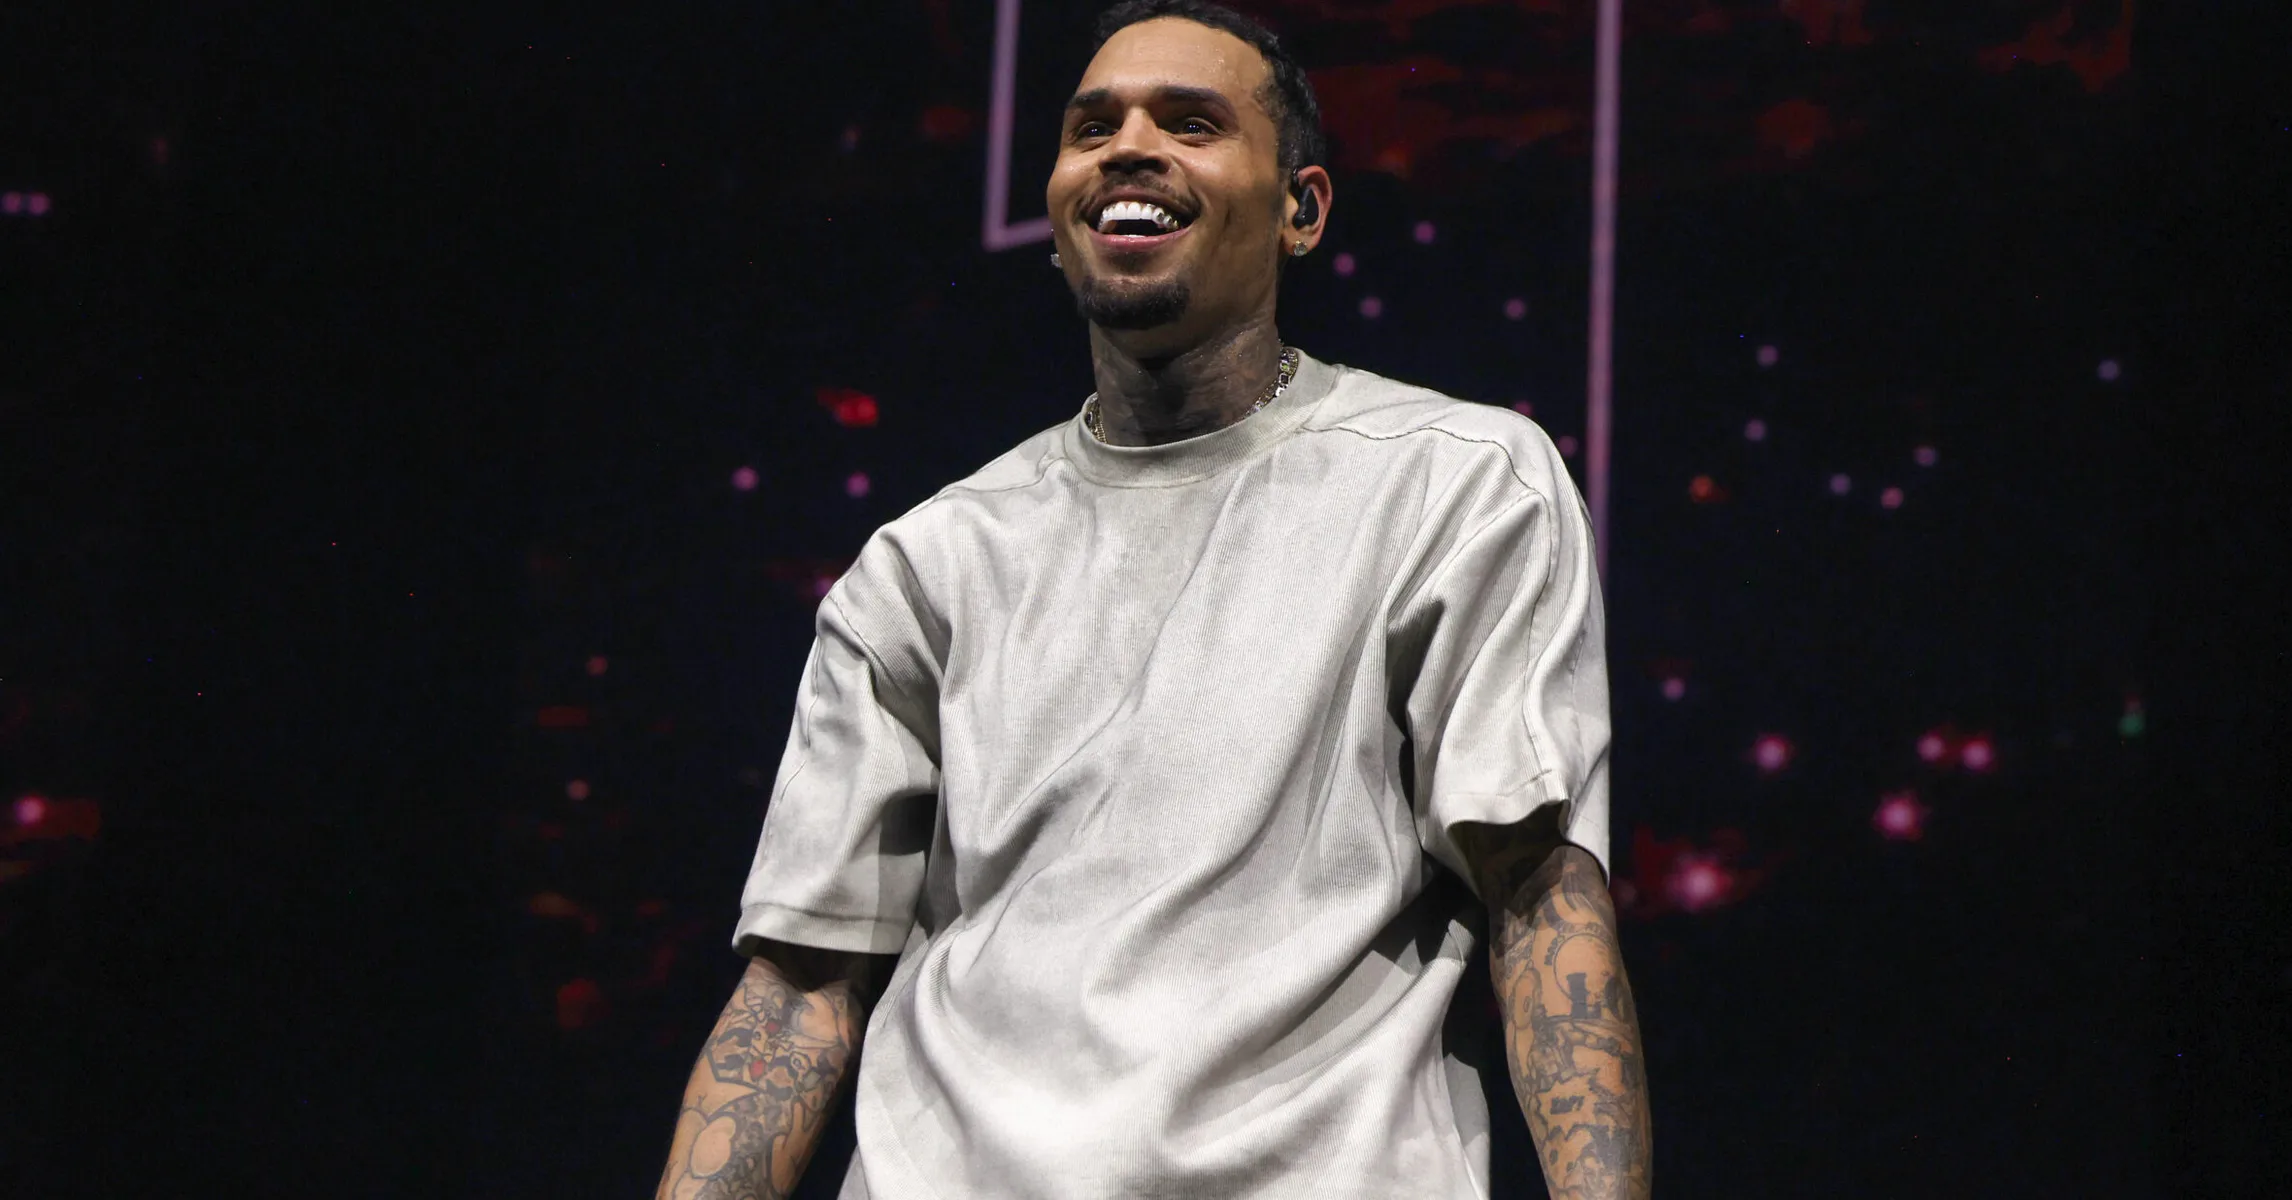 Chris Brown makes disabled fans happy by refunding the meet & greet with some extra money